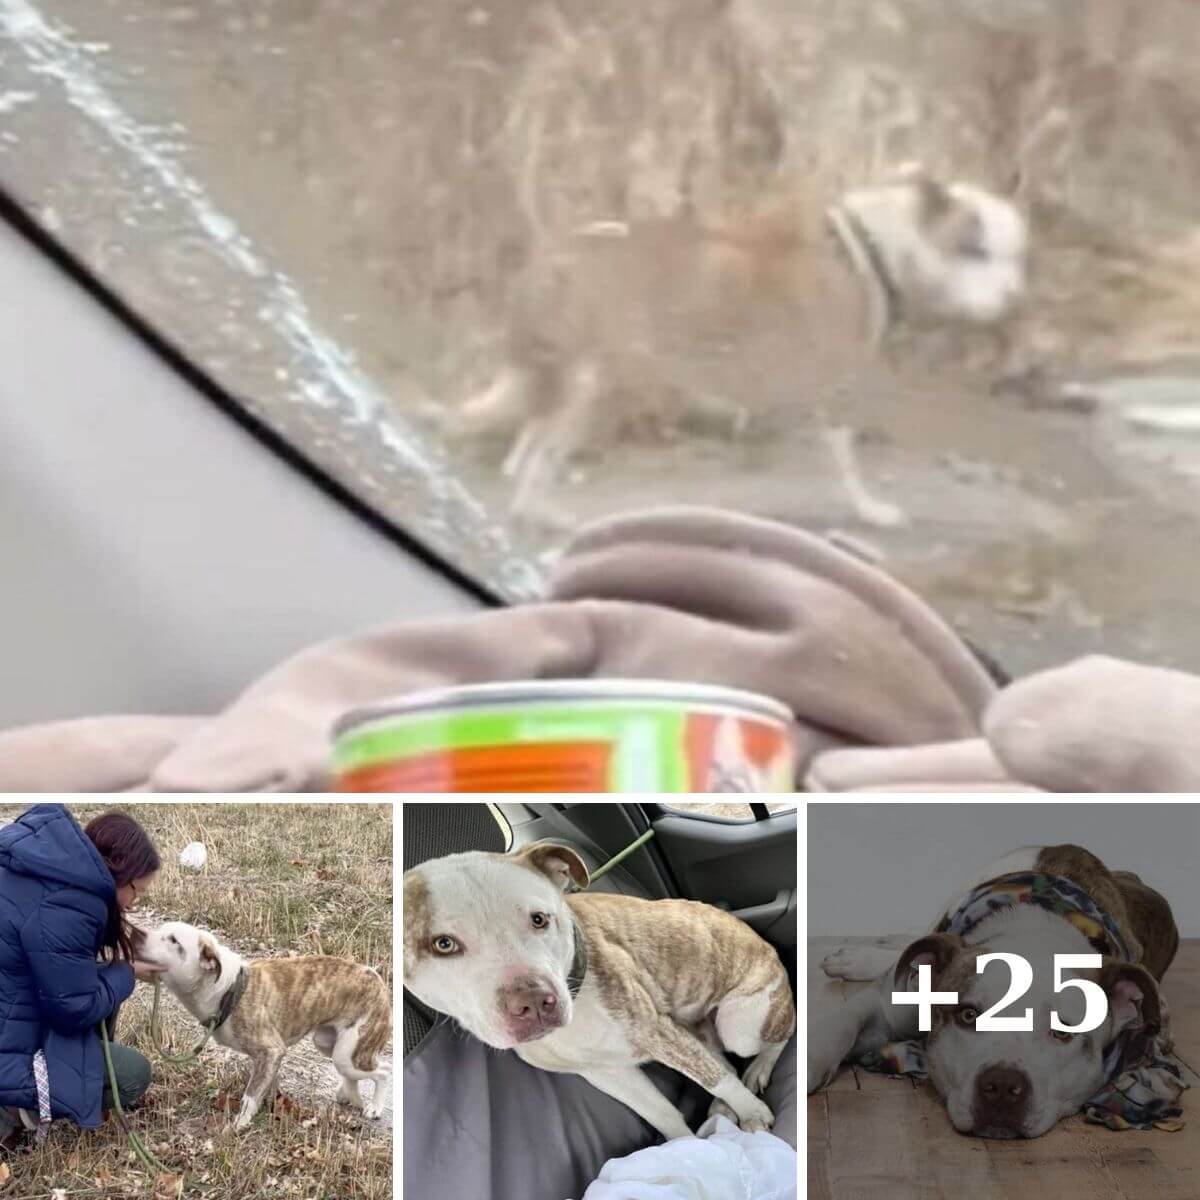 A Heartwarming Tale of Rescue: The Frozen Dog Who Found Warmth in a Stranger's Heart